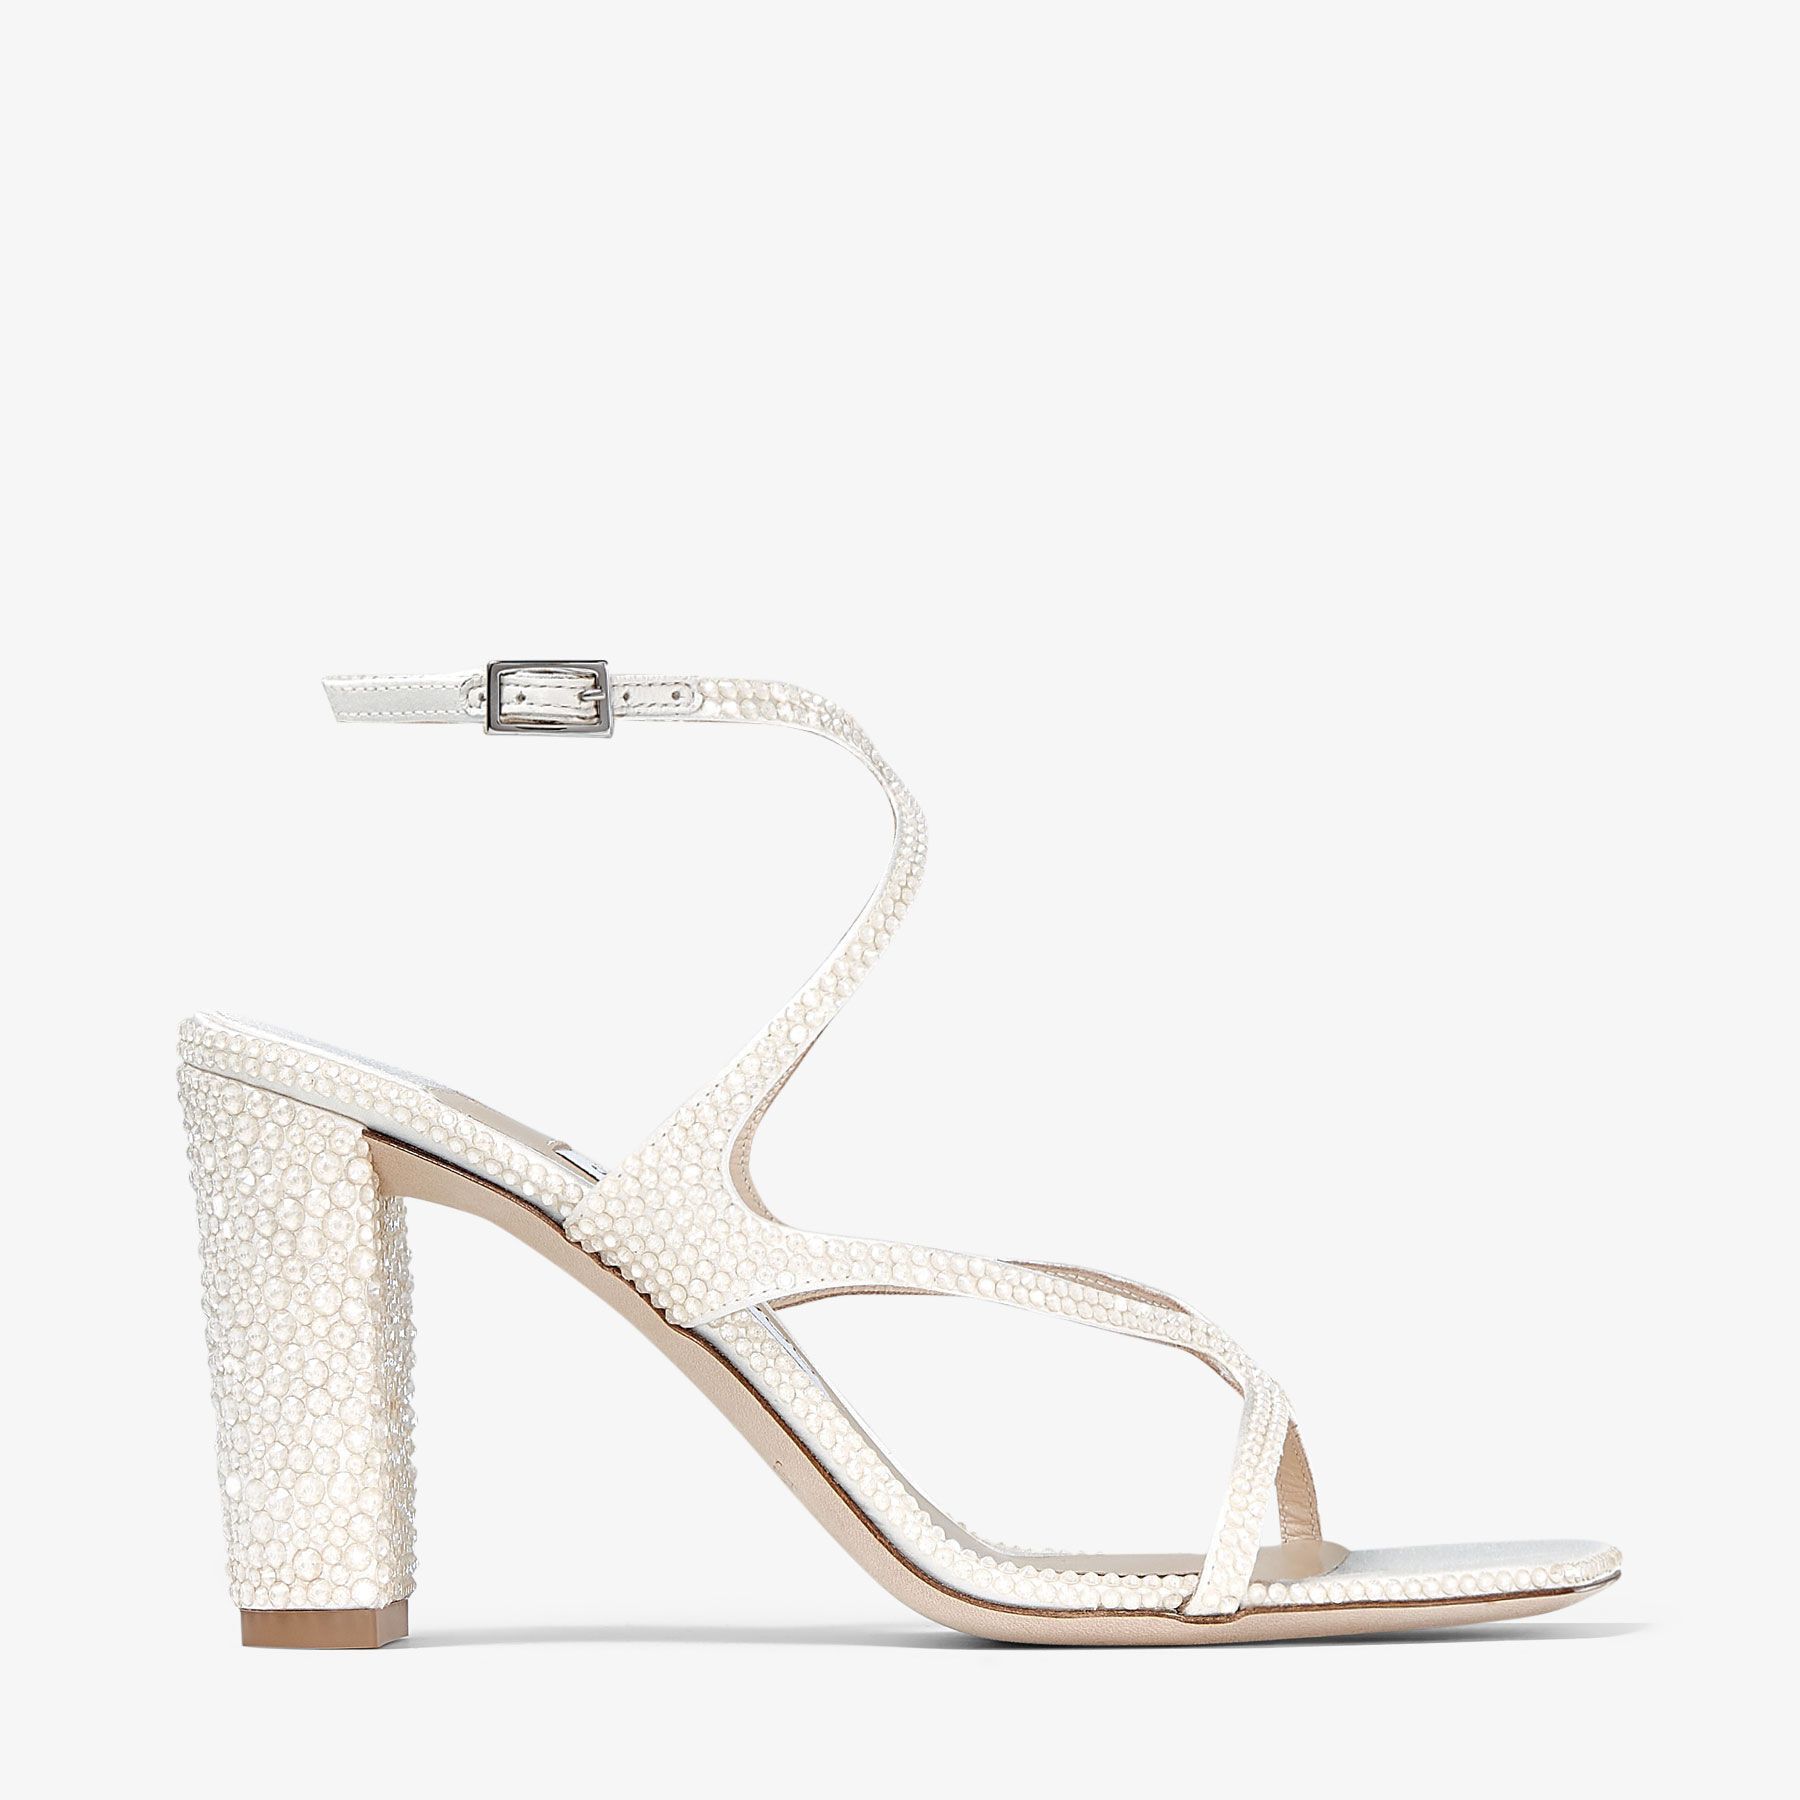 Azie 85 | Ivory Satin Sandals with Crystals | New Collection 